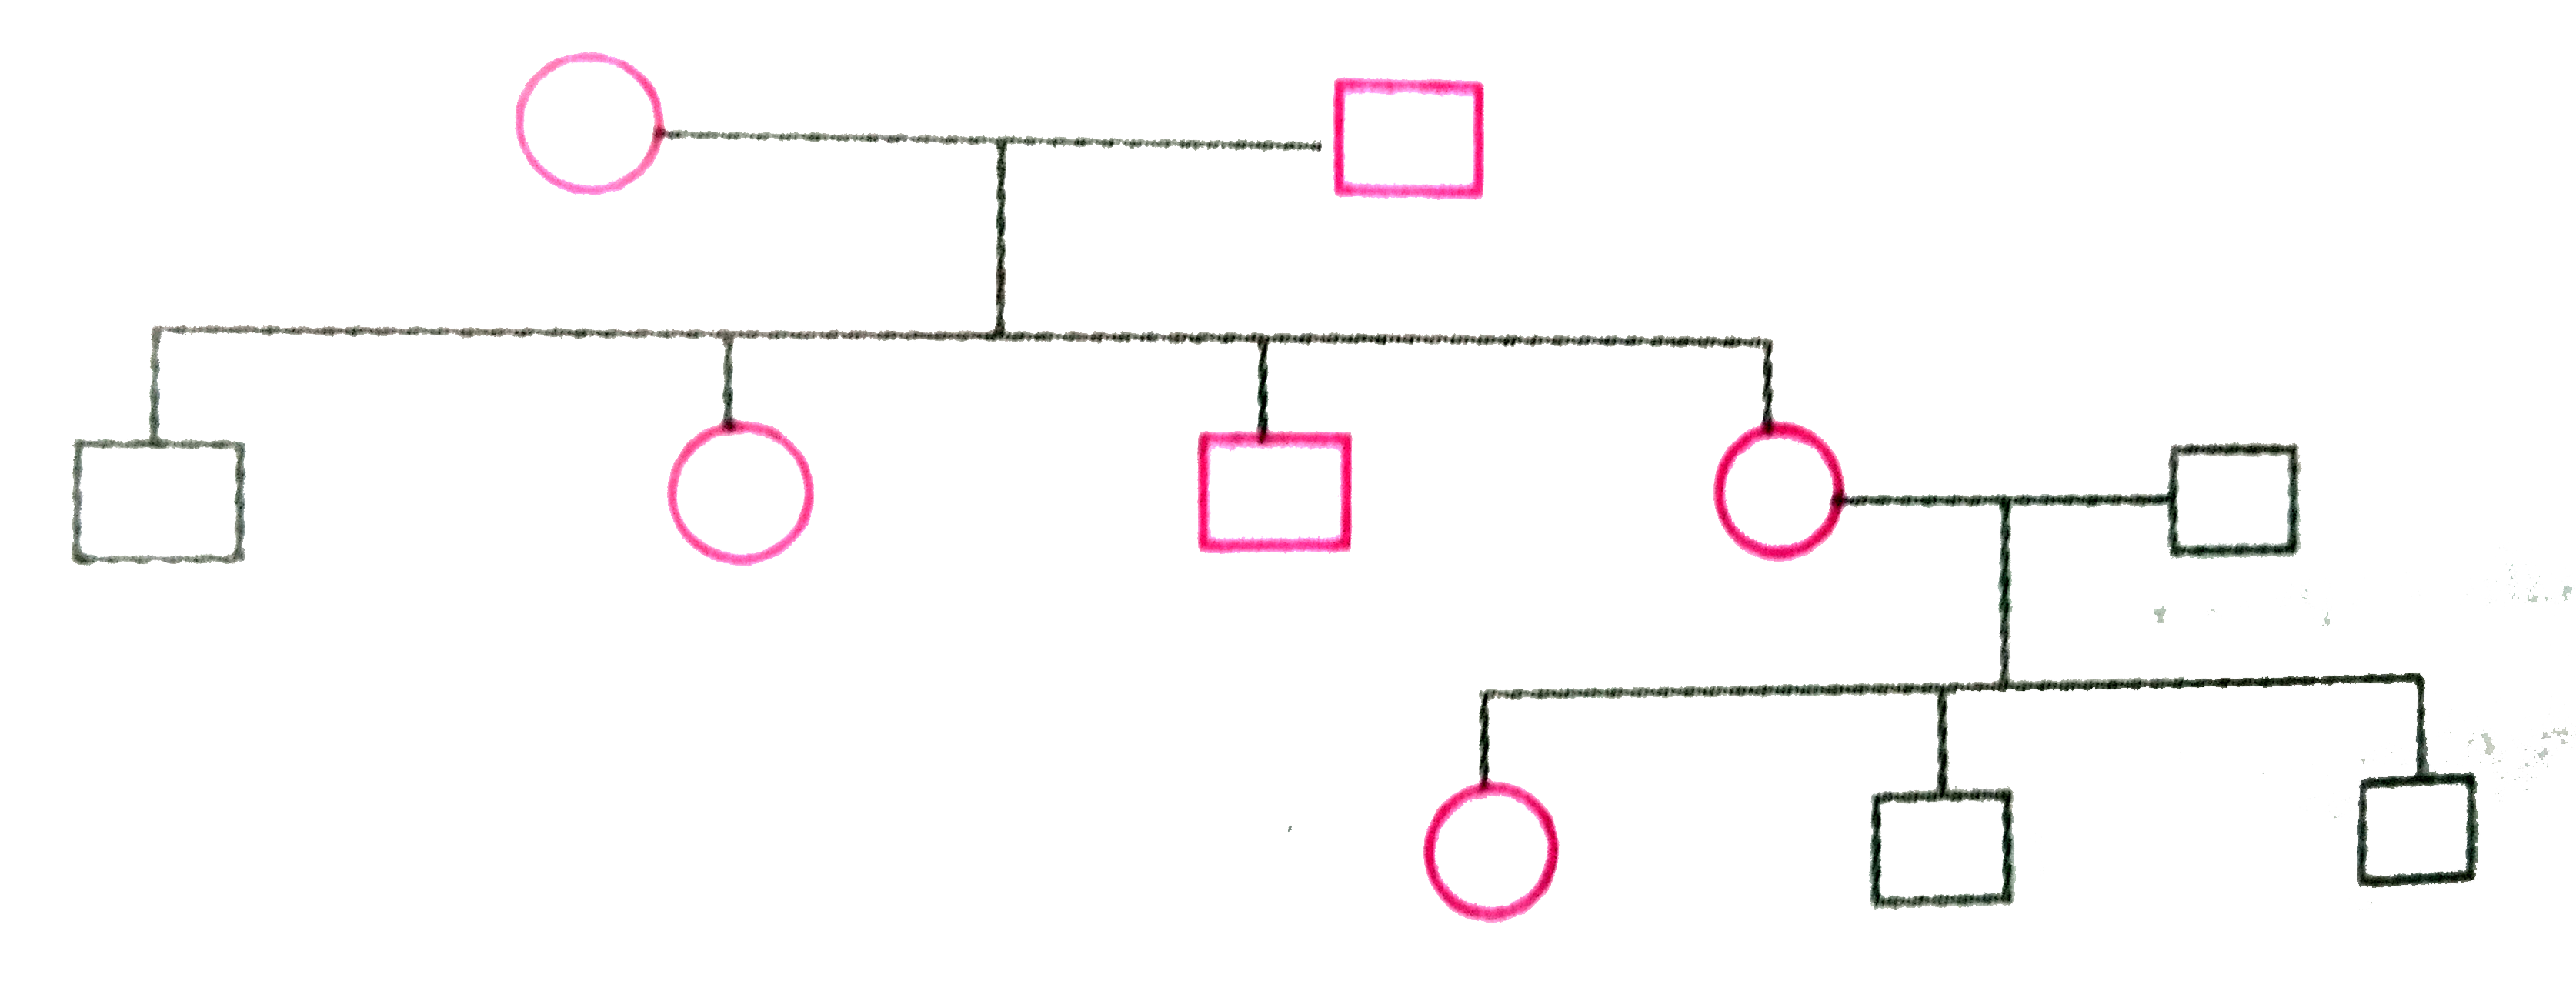 Study the given pedigree chart and answer the questions that follow:       (a) Is the trait recessive or dominant?   (b) Is the trait sex-linked or autosomal?   (c) Give the genotypes of the parents show in generation  I and their third child shown in generation II and the first gradchild shown in generation III.